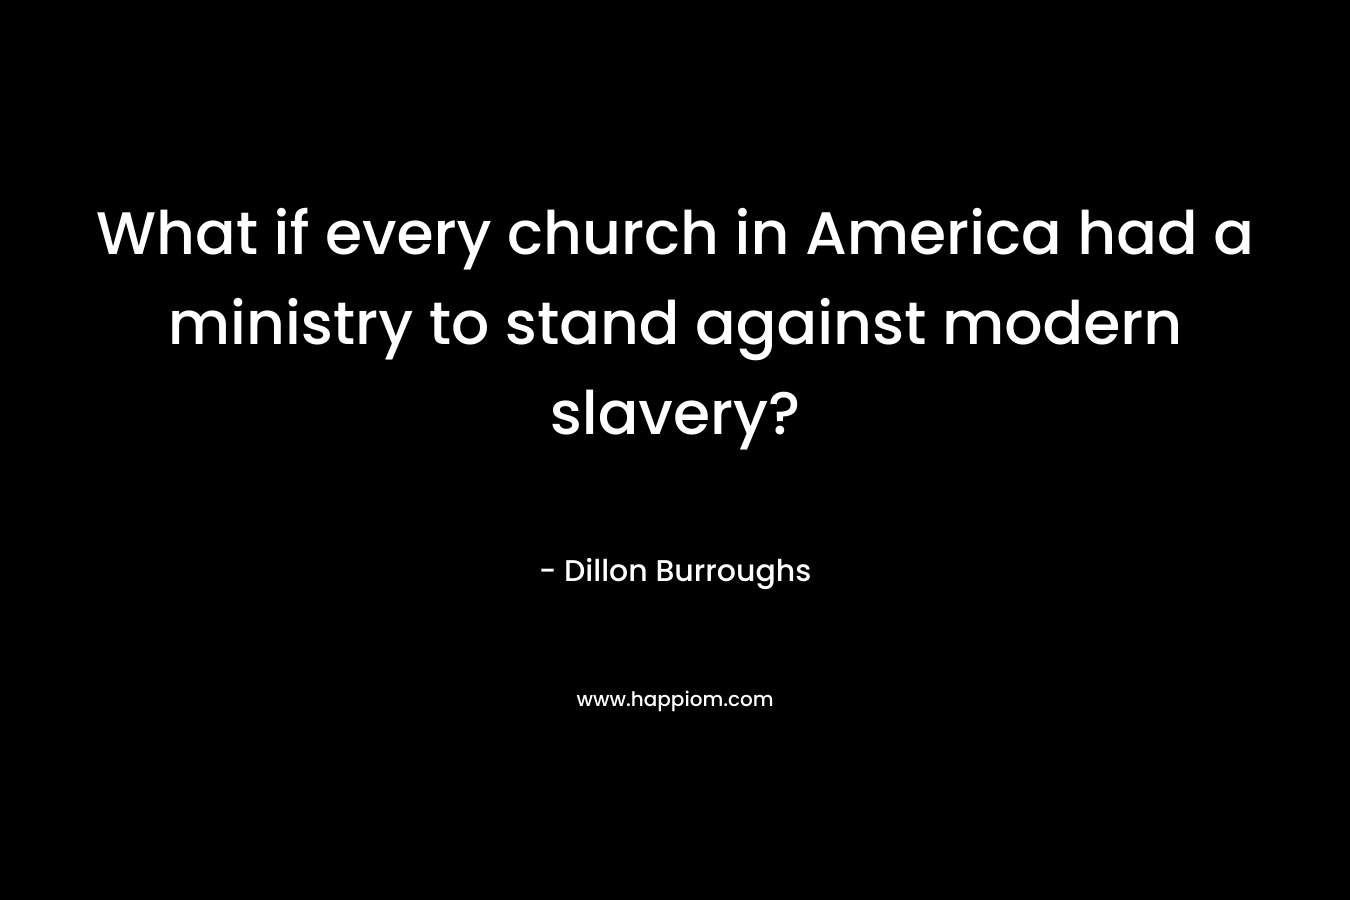 What if every church in America had a ministry to stand against modern slavery? – Dillon Burroughs